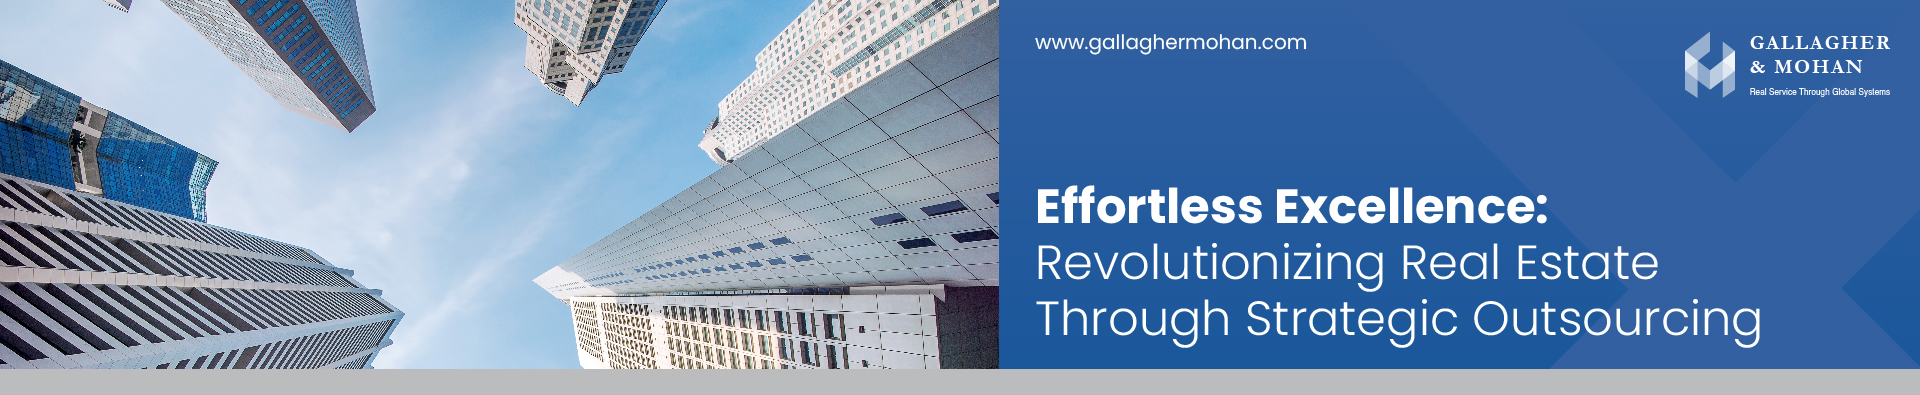 Effortless Excellence Revolutionizing Real Estate Through Strategic Outsourcing